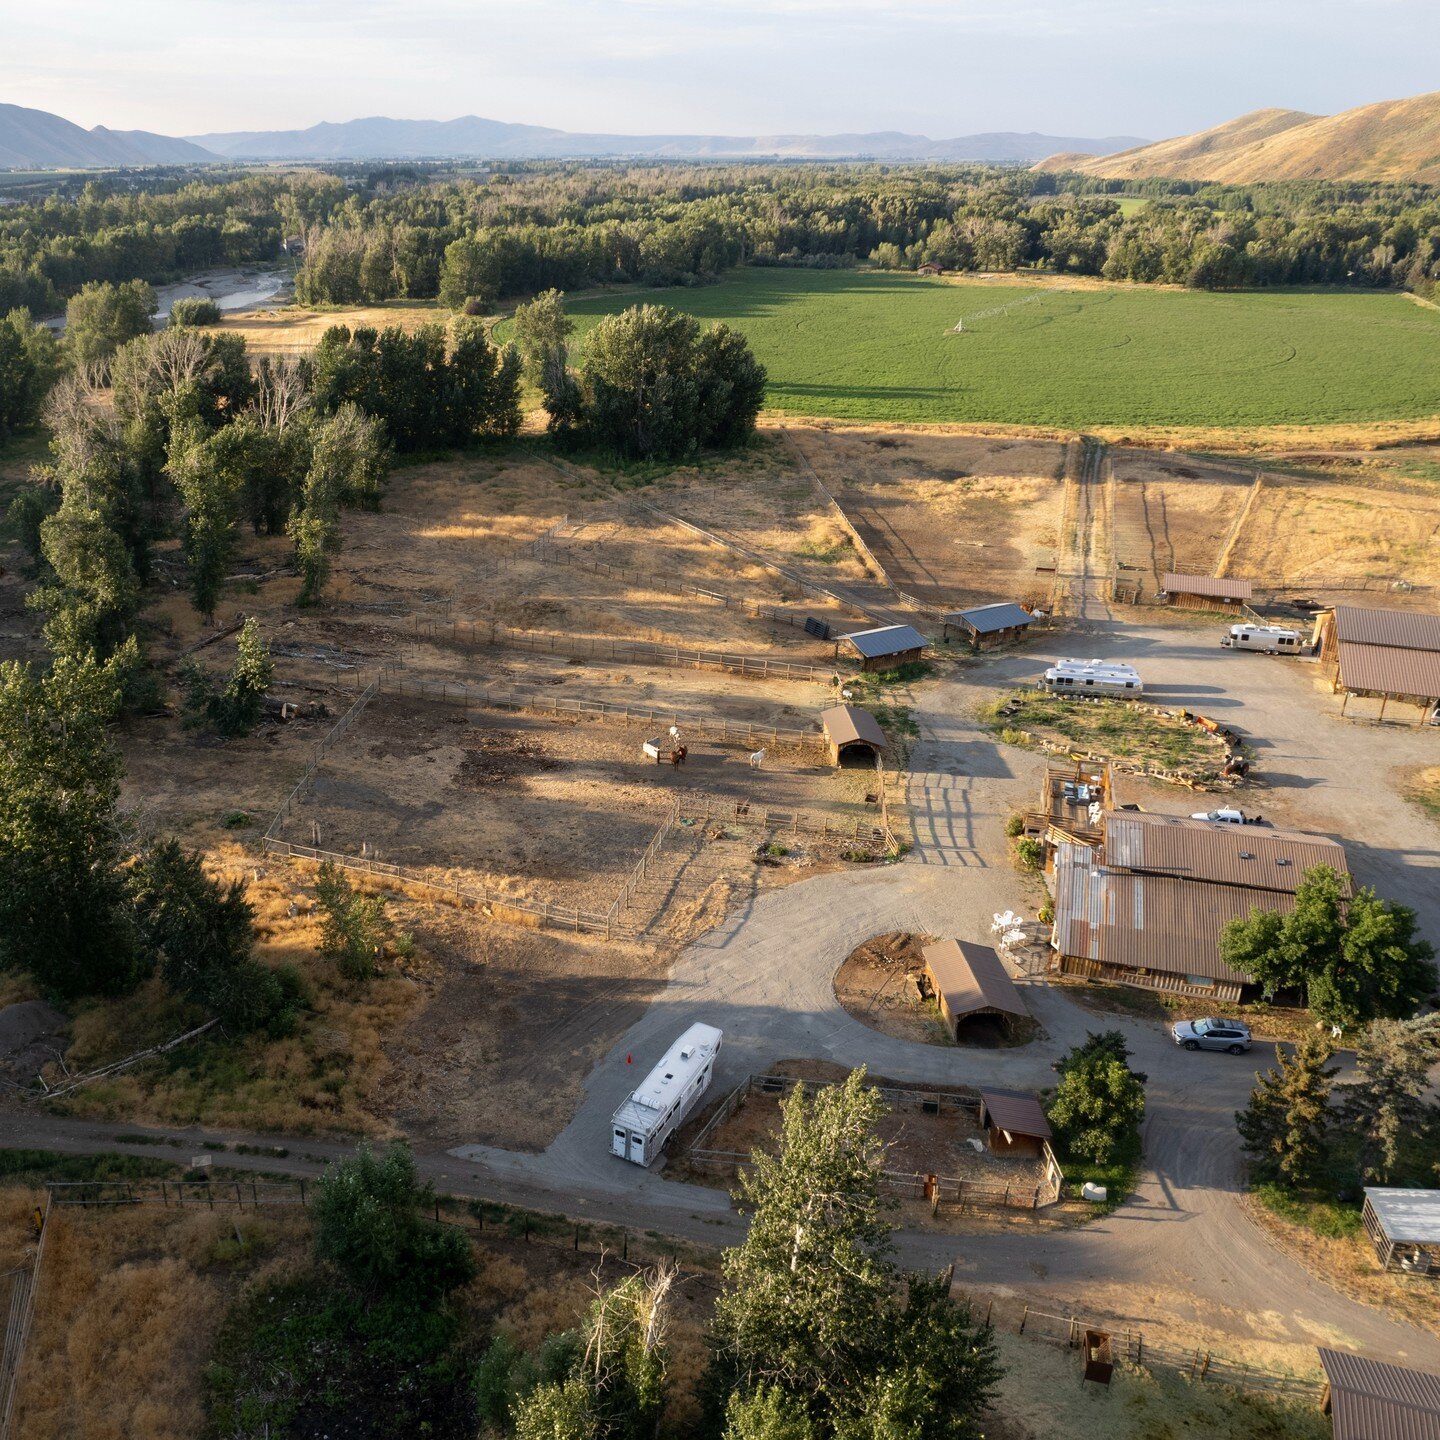 After a year and a half of reading, talking, learning, and soul-searching, we're officially tackling the conversion of a 76 acre horse ranch along the Big Wood River near Sun Valley, Idaho, into a regenerative farm. Thus far, this summer's activities